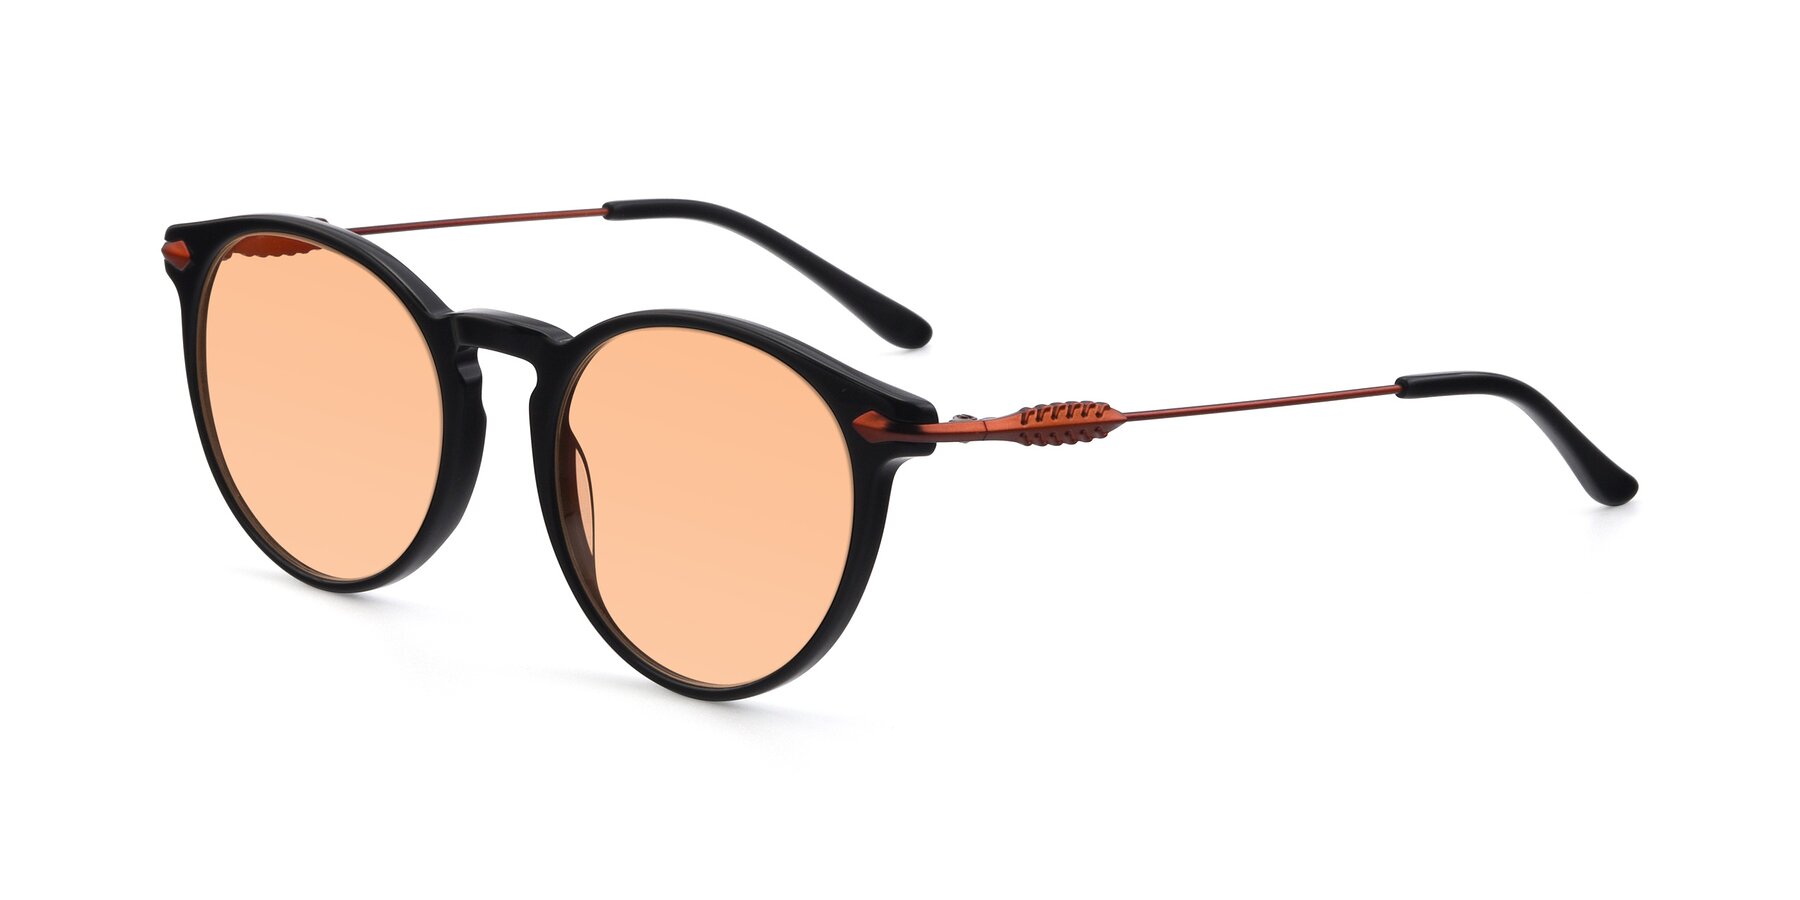 Angle of 17660 in Black with Light Orange Tinted Lenses